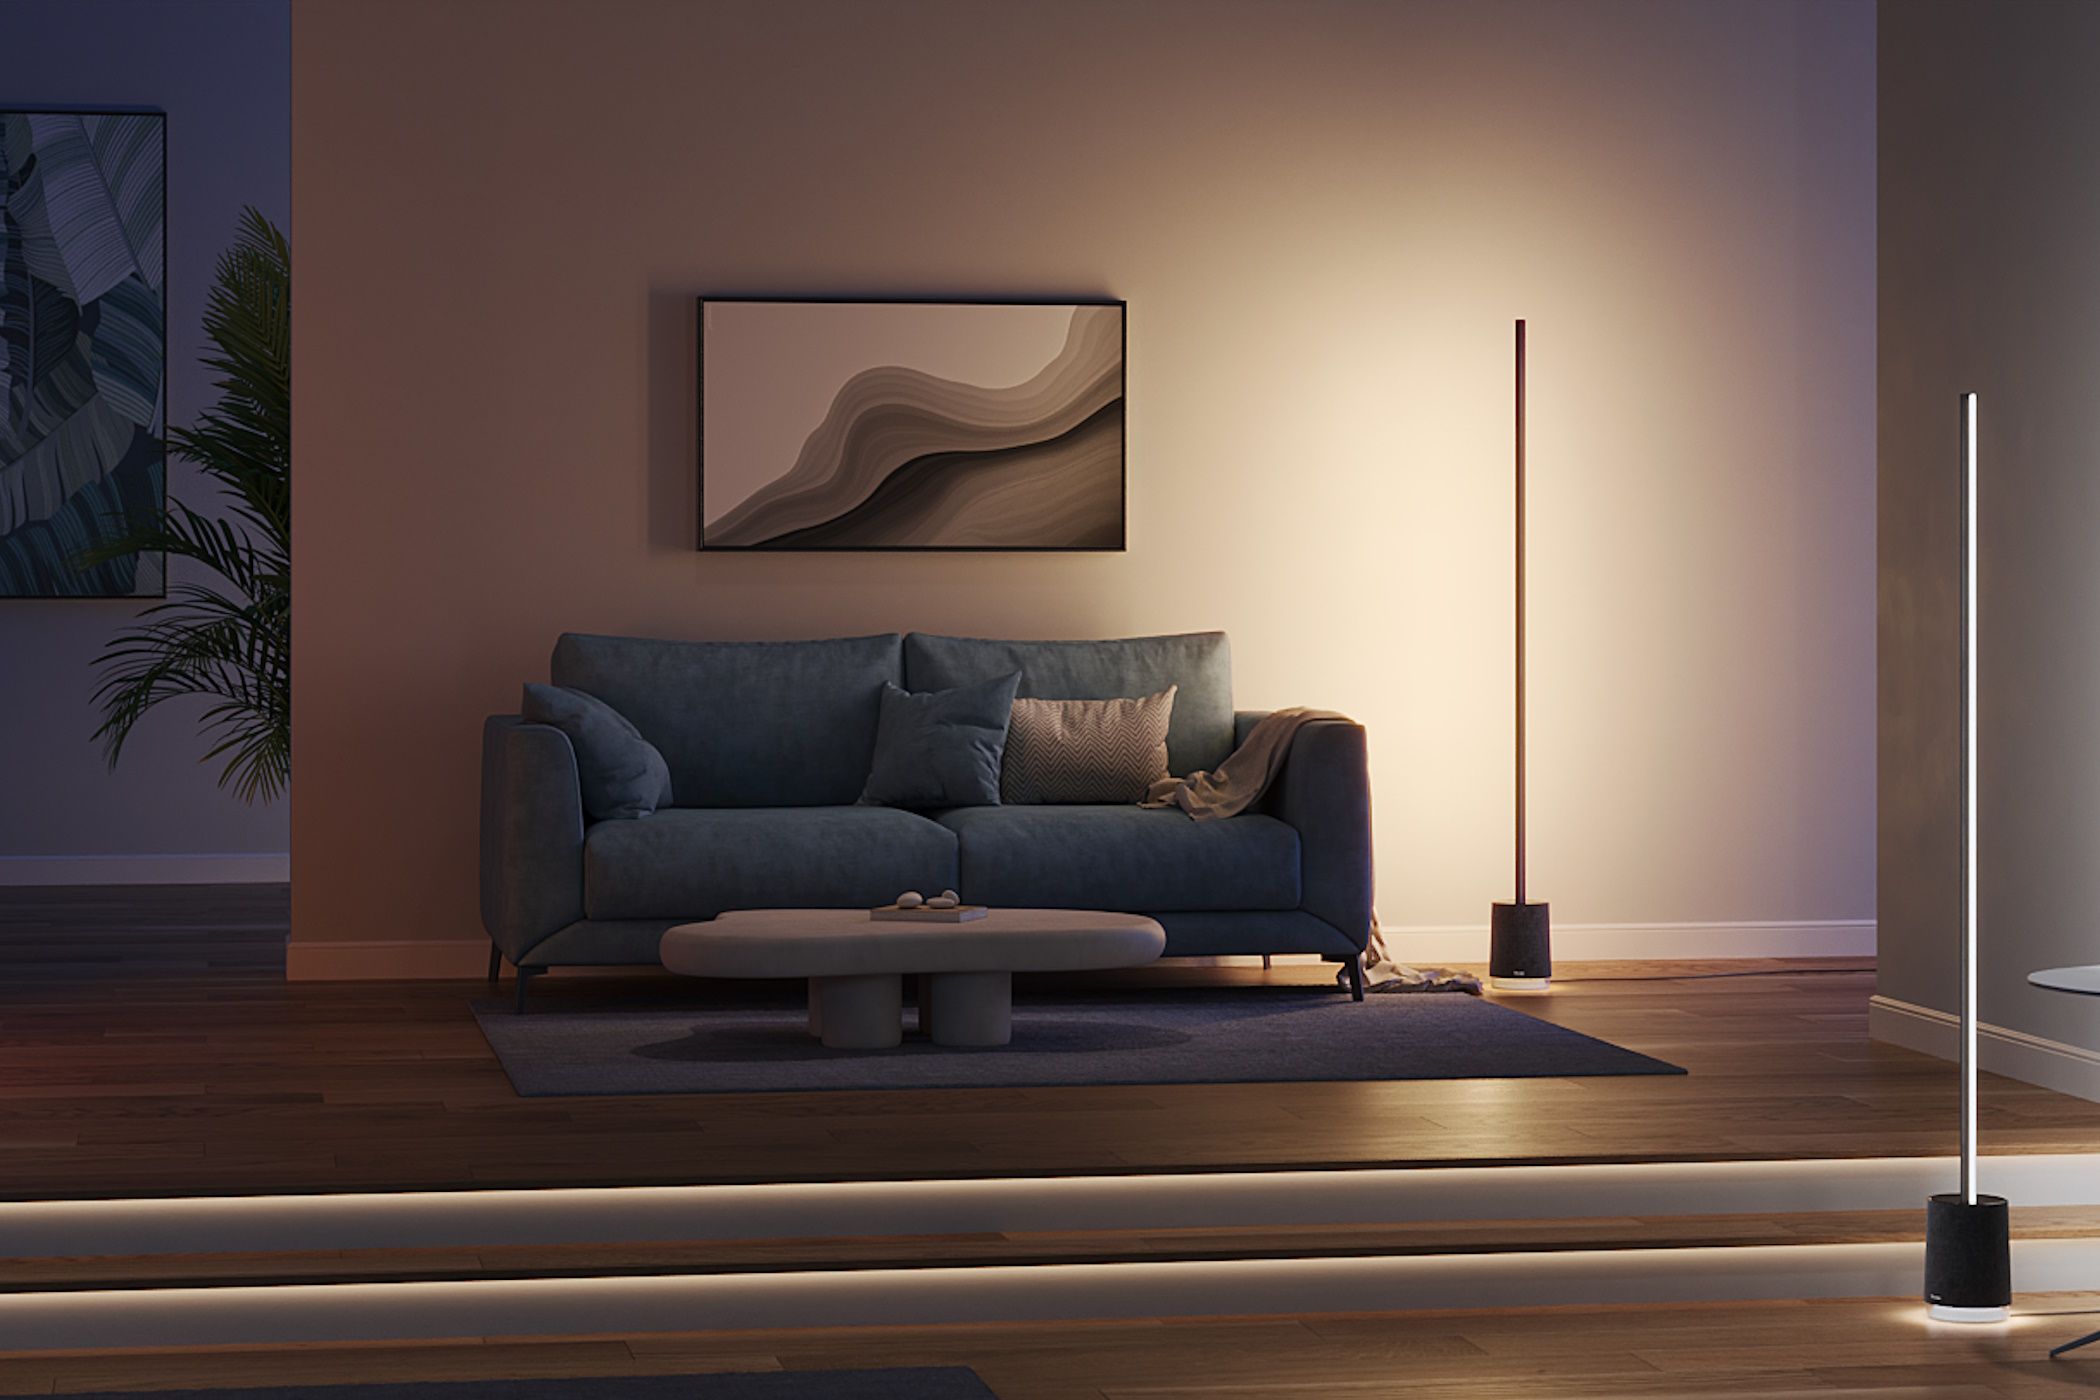 Two Govee floor lamps in a living area